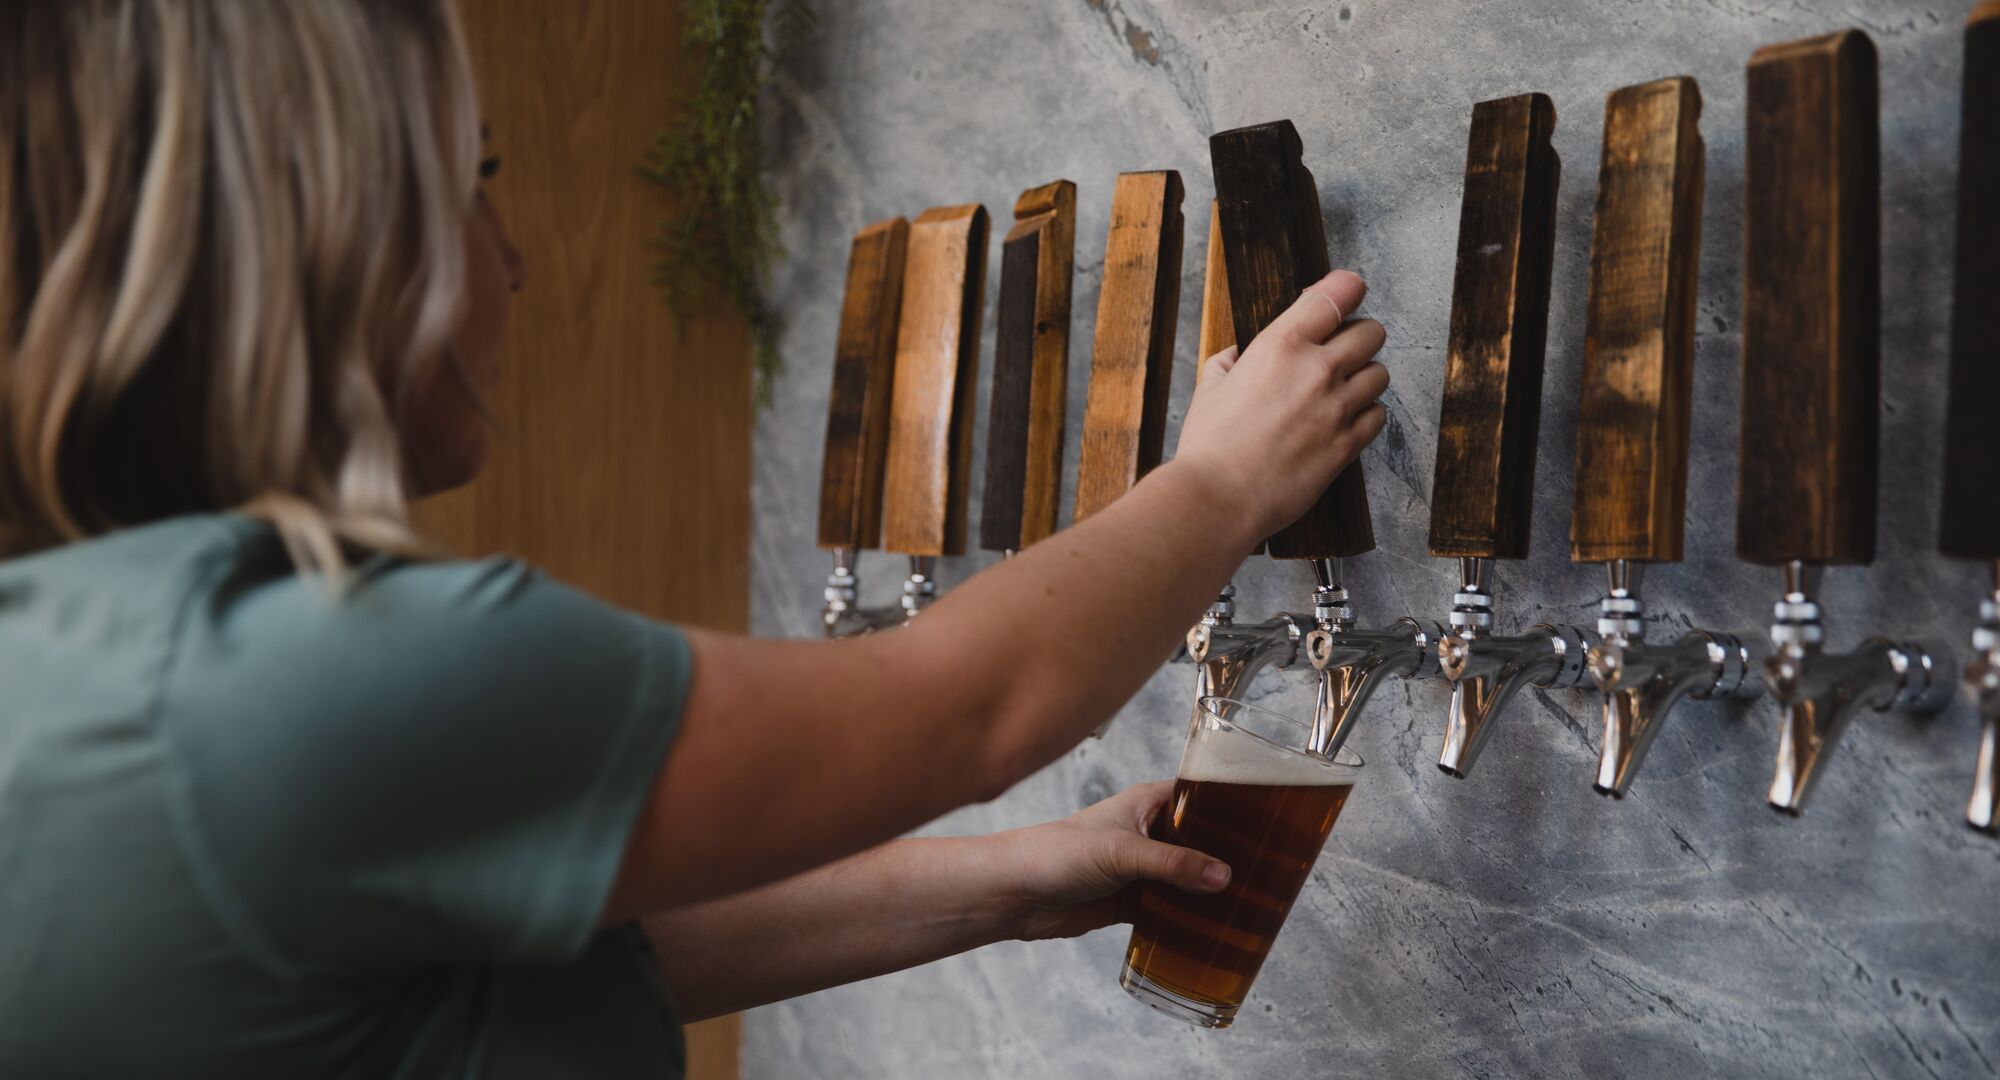 Staff member pouring beer at Three Bears Brewery & Restaurant